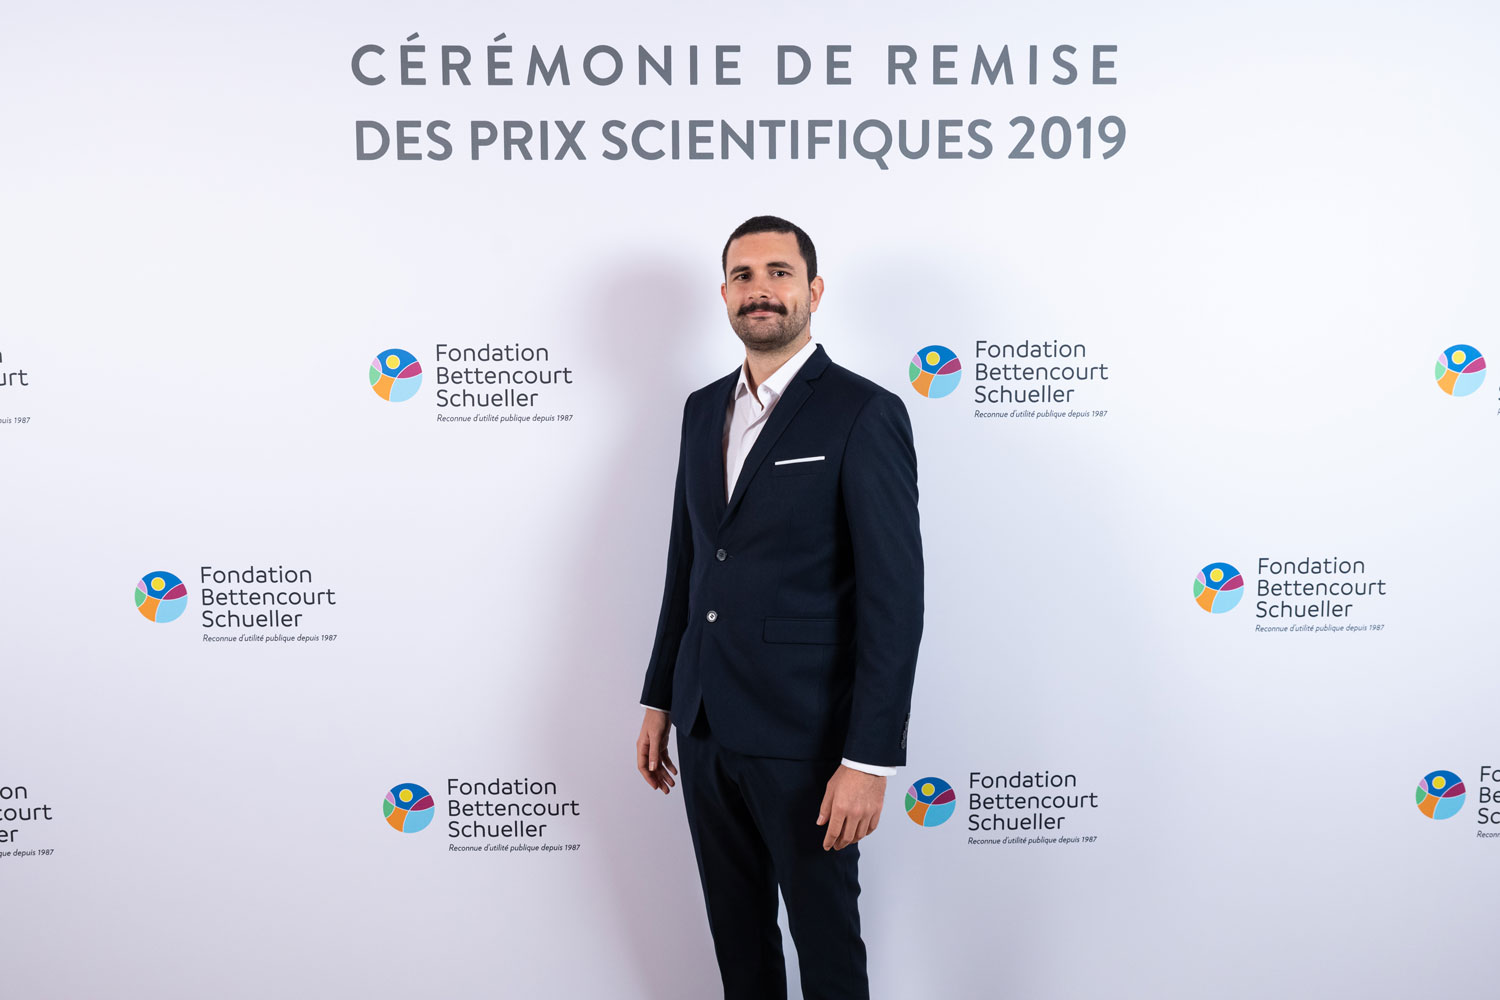 Thomas Juan, PhD student of Maximilian Fürthauer's team at iBV, winner of the Bettencourt Prize for Young Researchers 2019